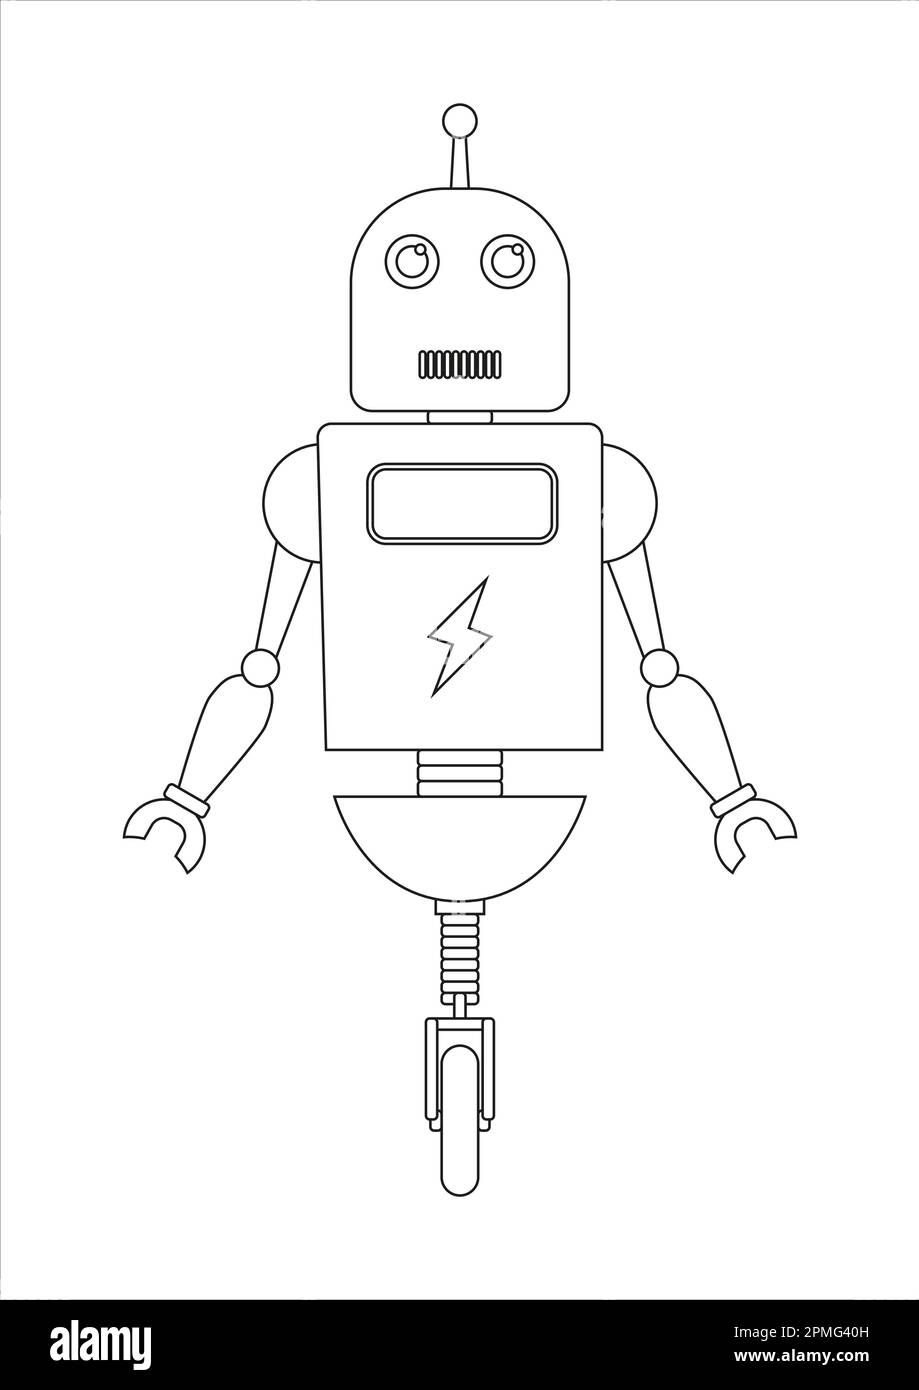 Coloring Page Of Robot Cartoon Character Stock Vector